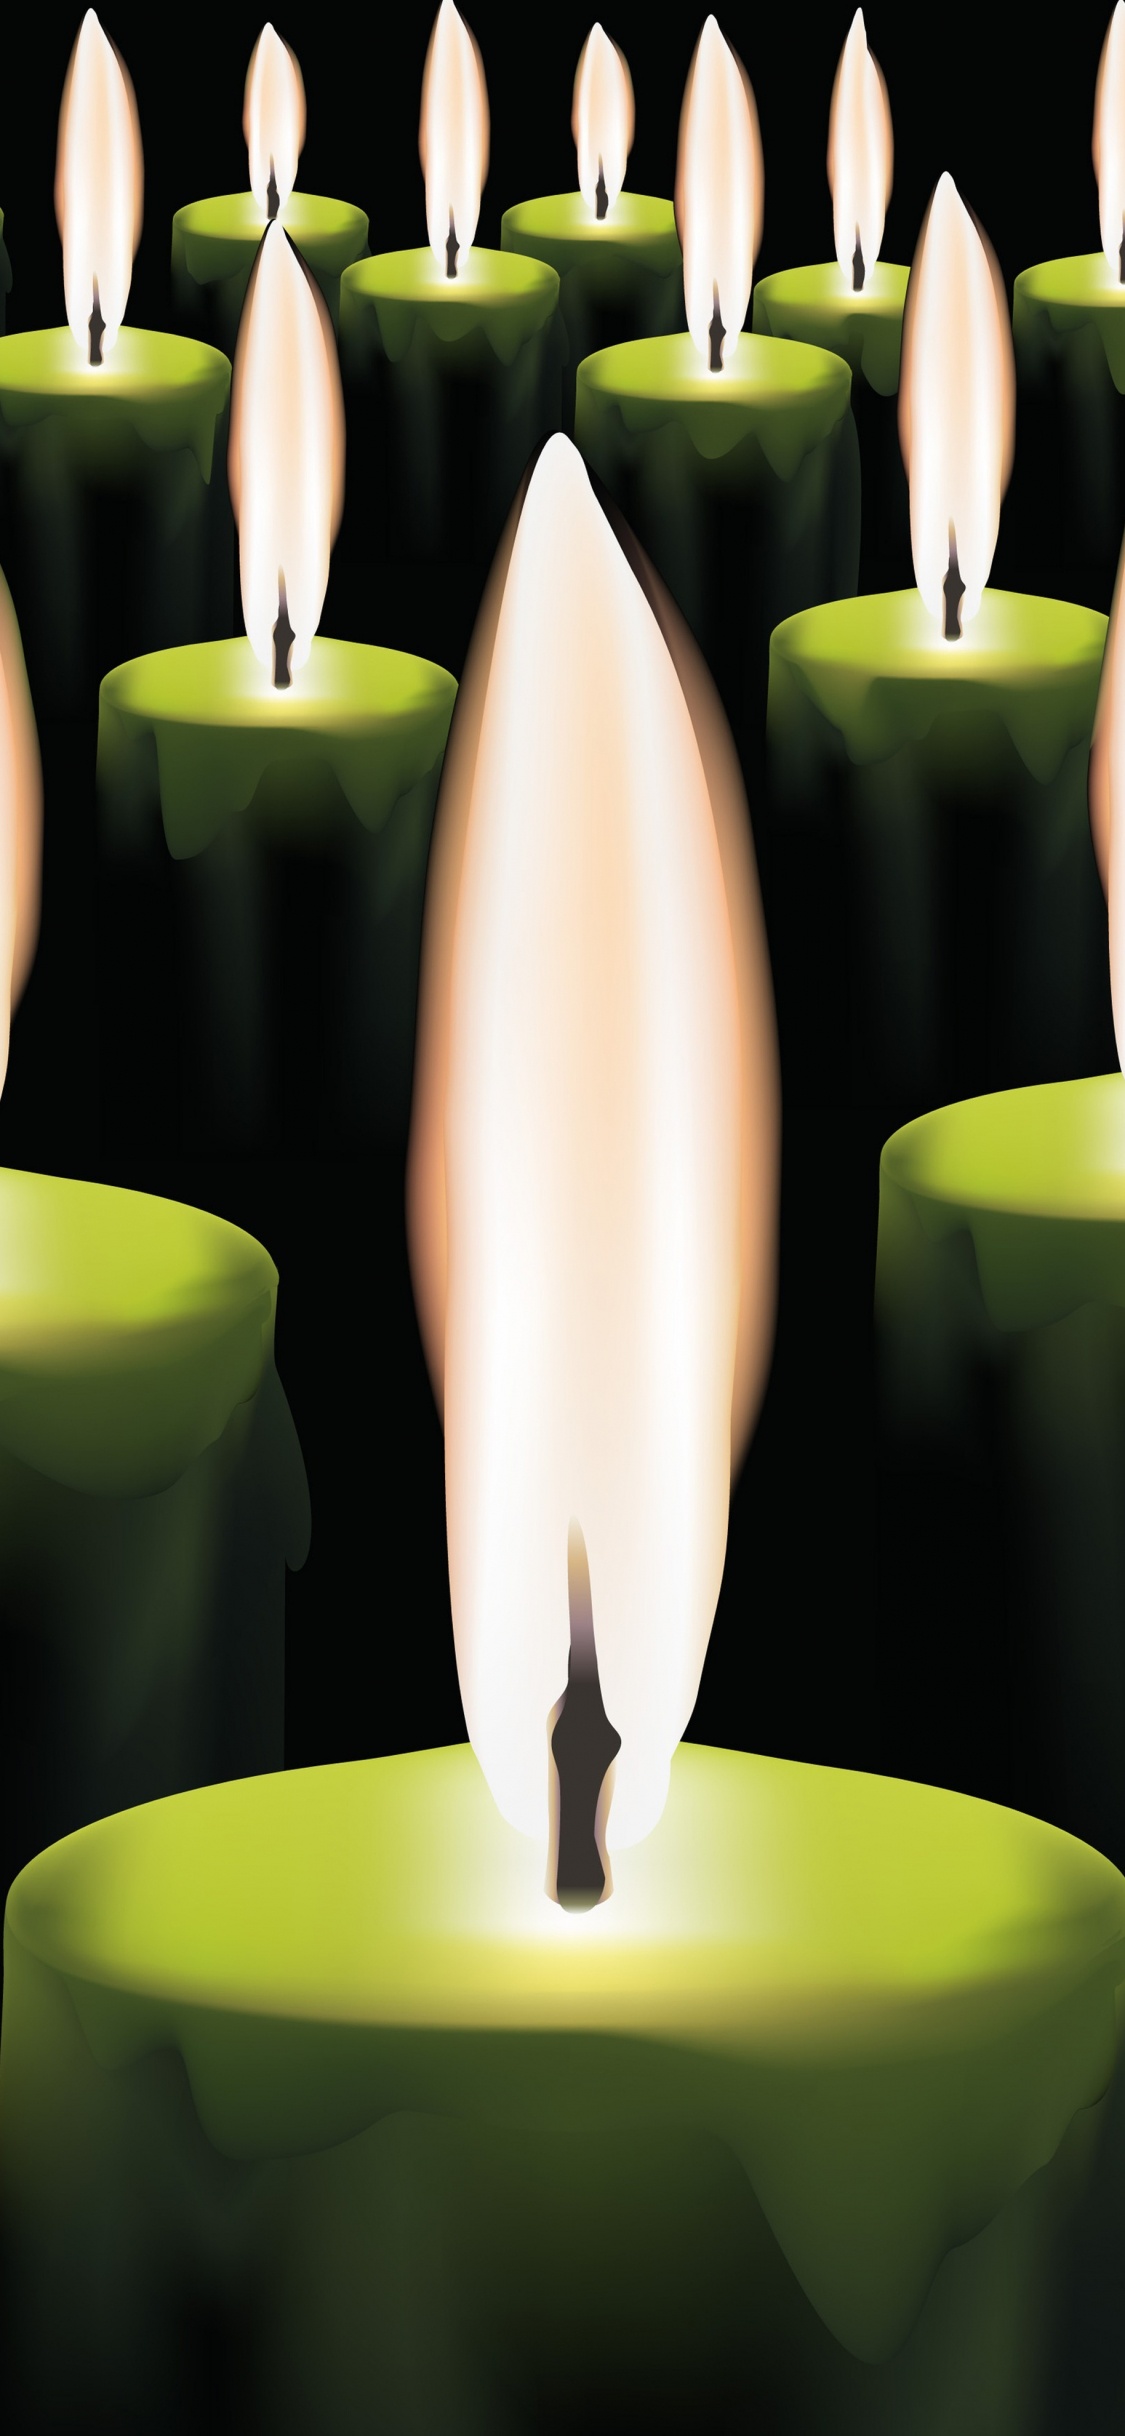 Burning Candles, Candle, Flame, Light, Lighting. Wallpaper in 1125x2436 Resolution